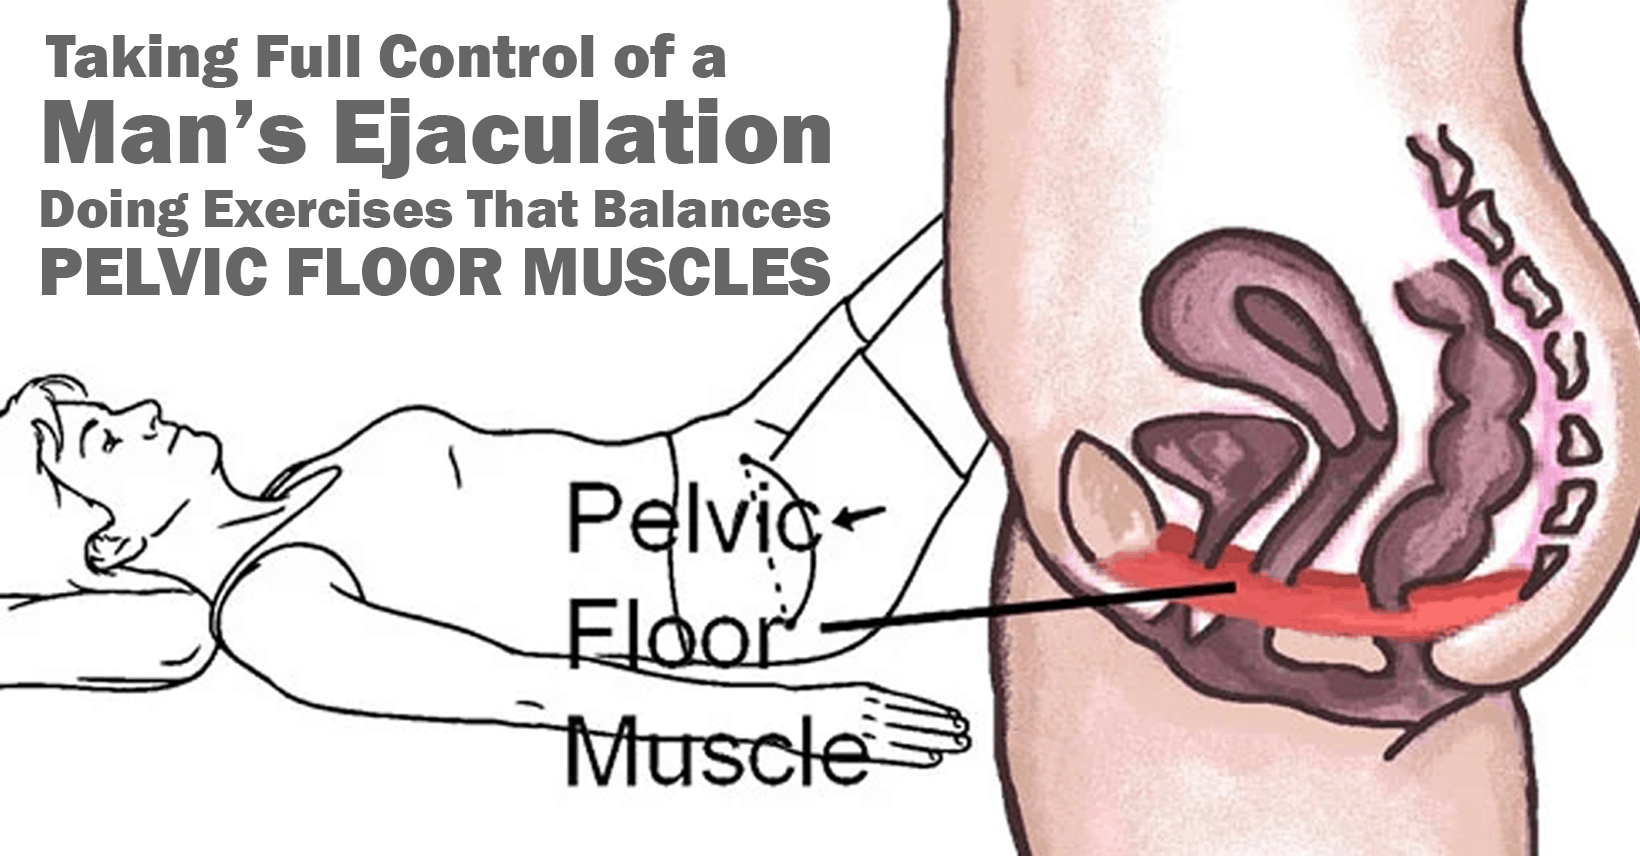 Achieving A Balanced Pelvic Floor Muscles Is Vital To Gain Ejaculatory Control In Men Menlify